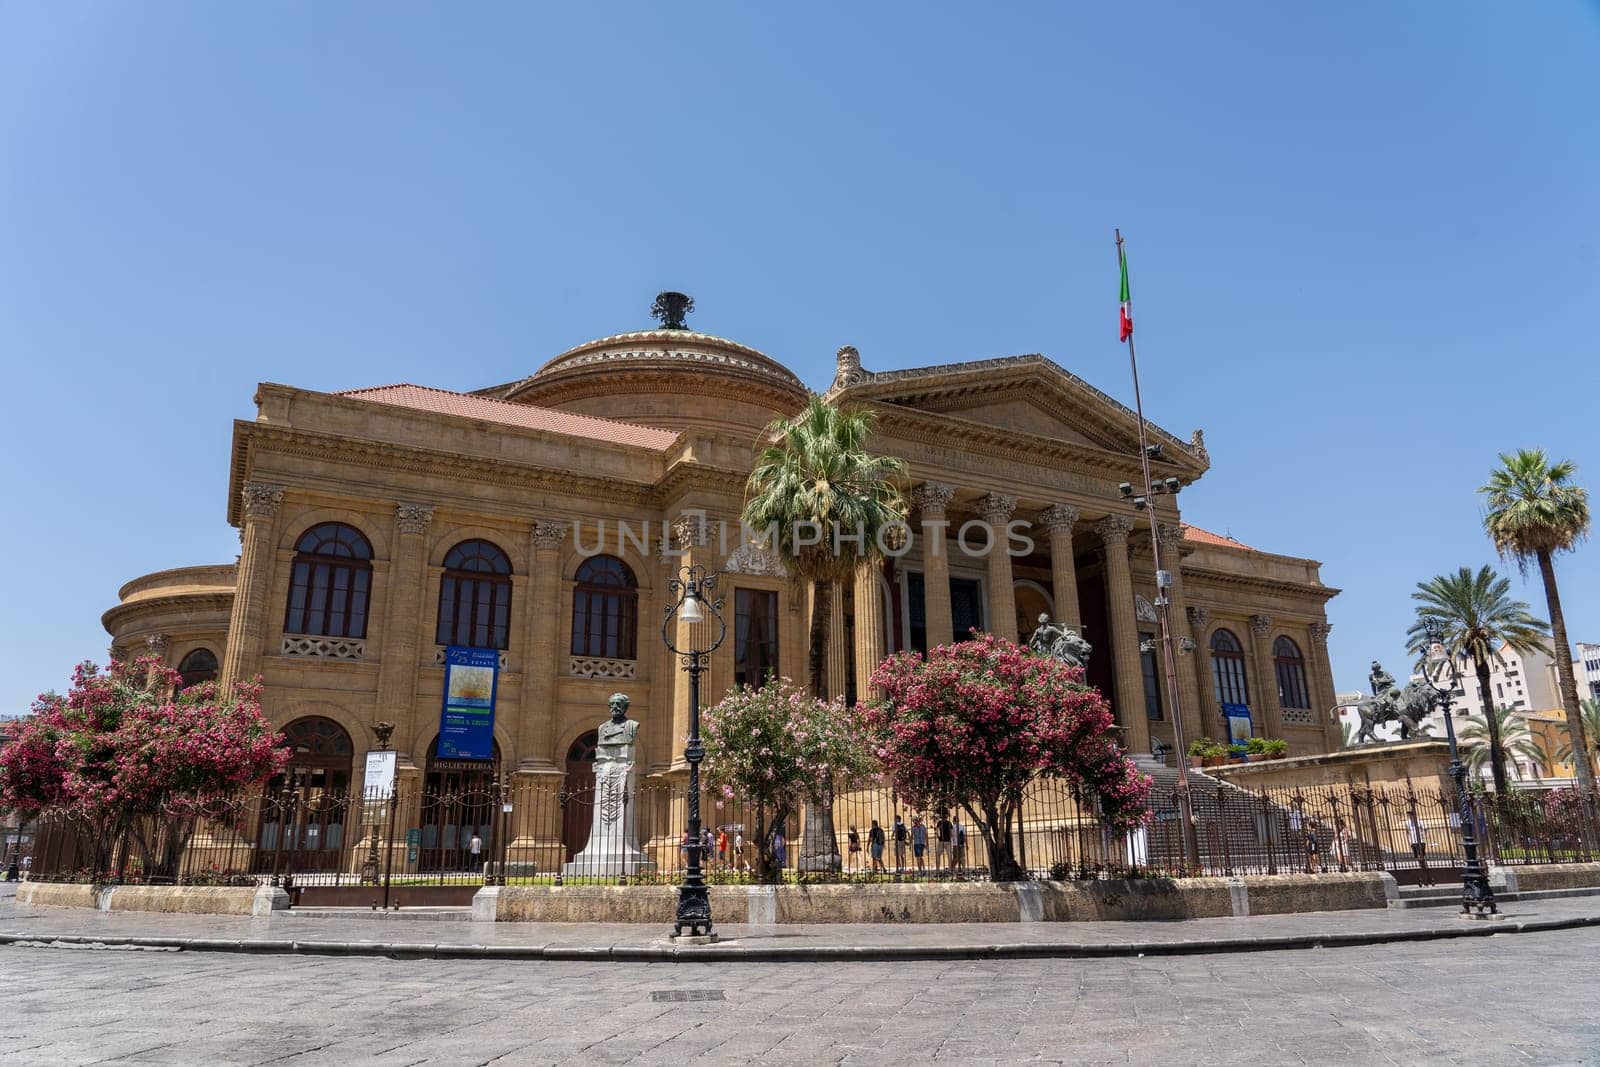 Palermo, Italy - July 20, 2023: Exterior view of the famous Teatro Massimo in the historic city centre.